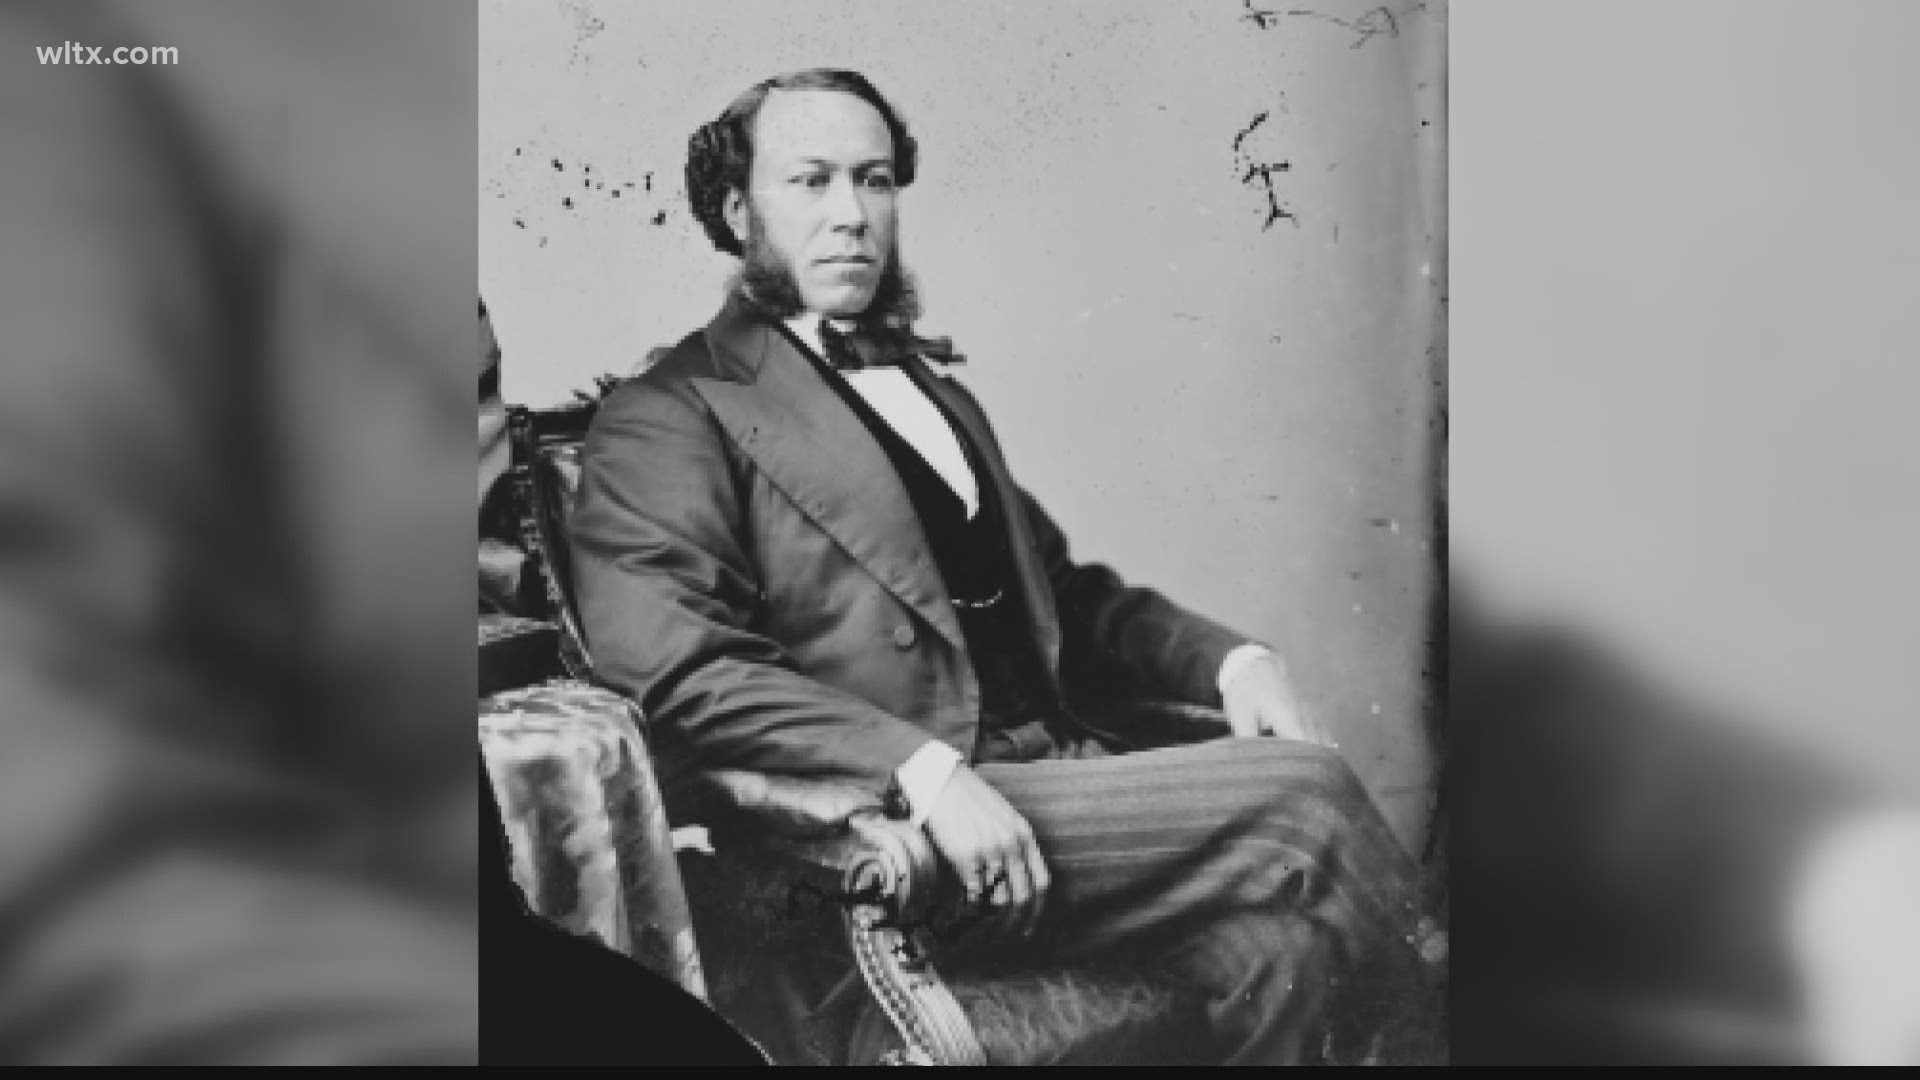 Joseph Rainey was born a slave in Georgetown, SC and was the first Black man in Congress.